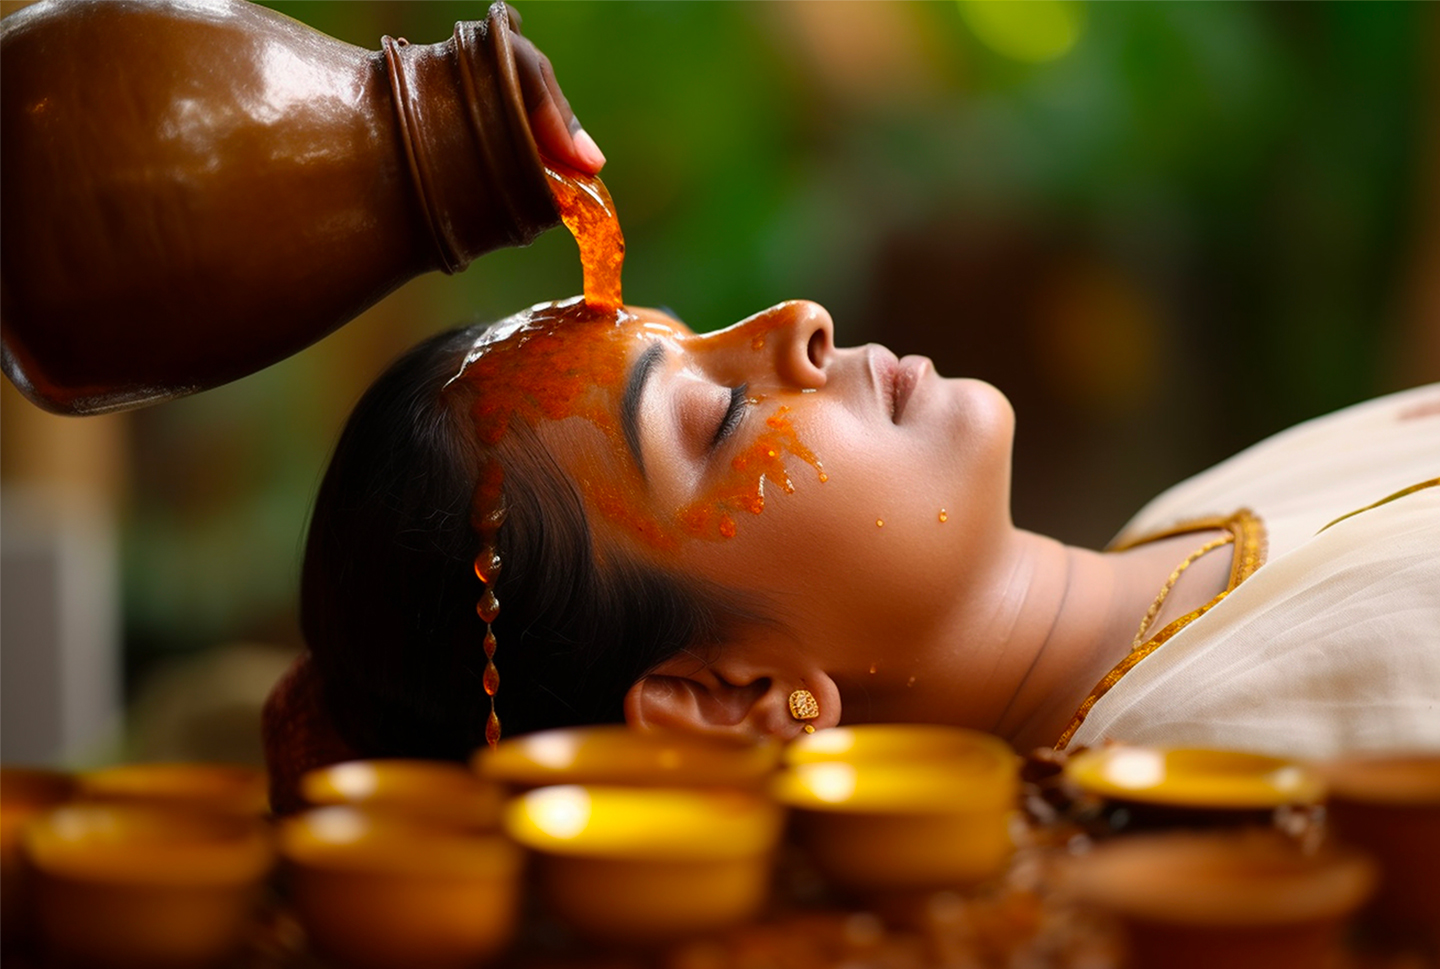 A person can regain balance with the help of Ayurvedic treatments.